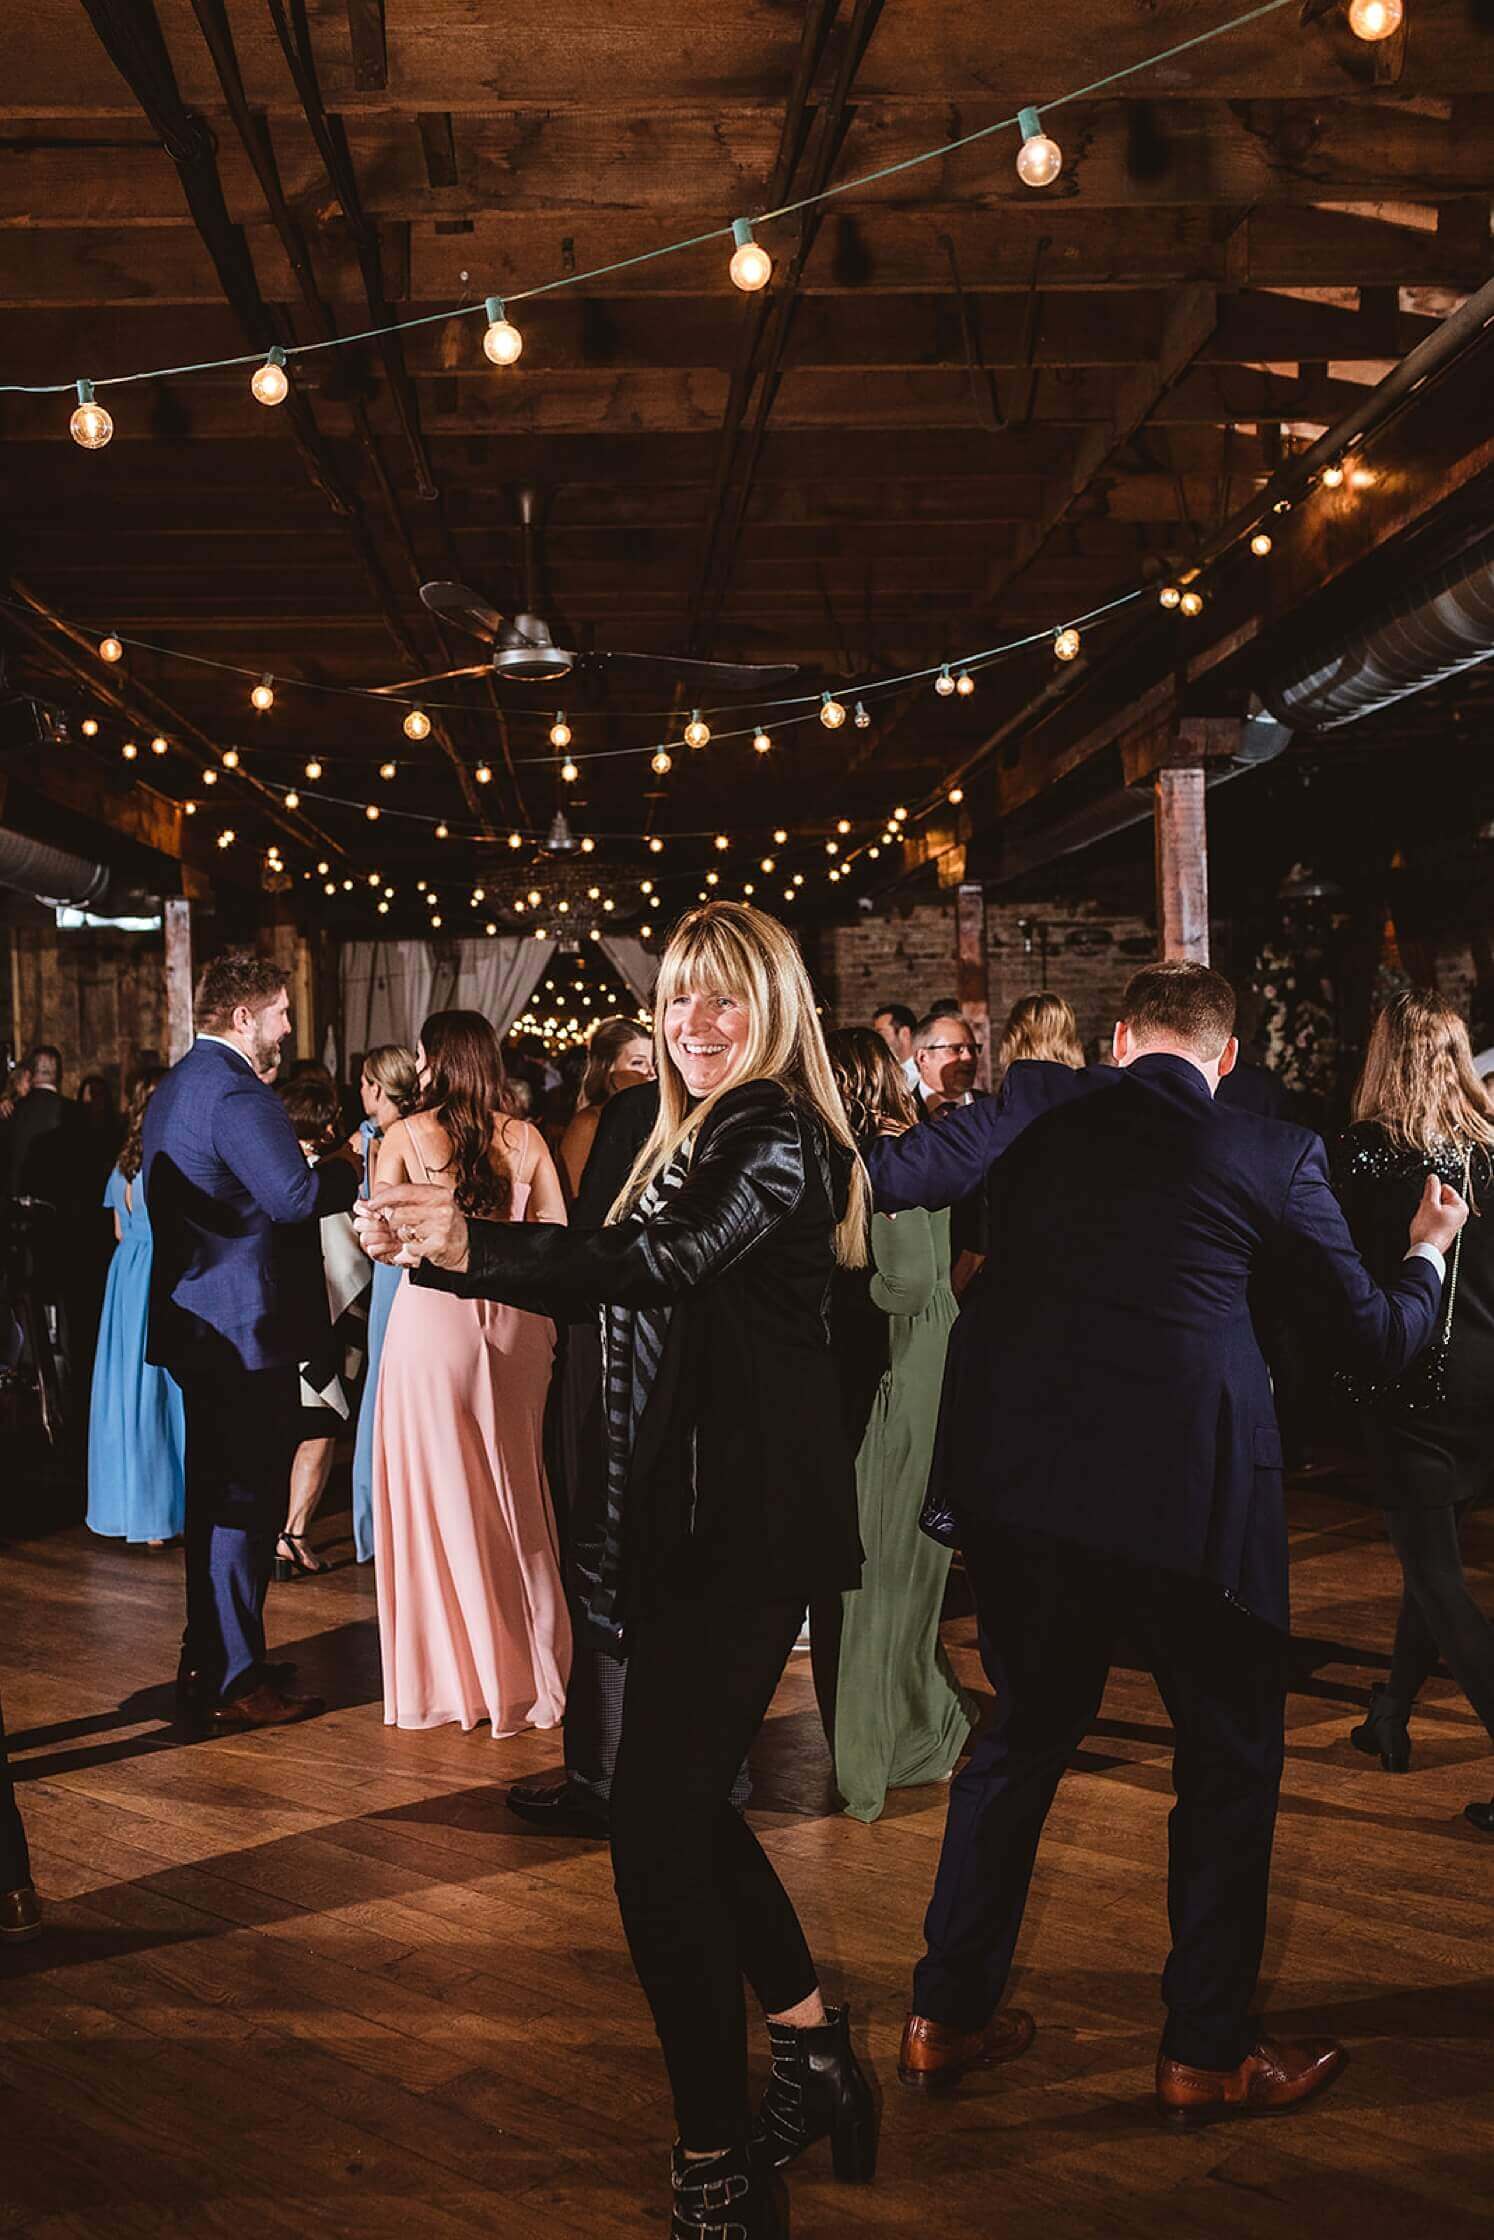 Wedding guests dancing at reception at The Haight, a winter wedding venue